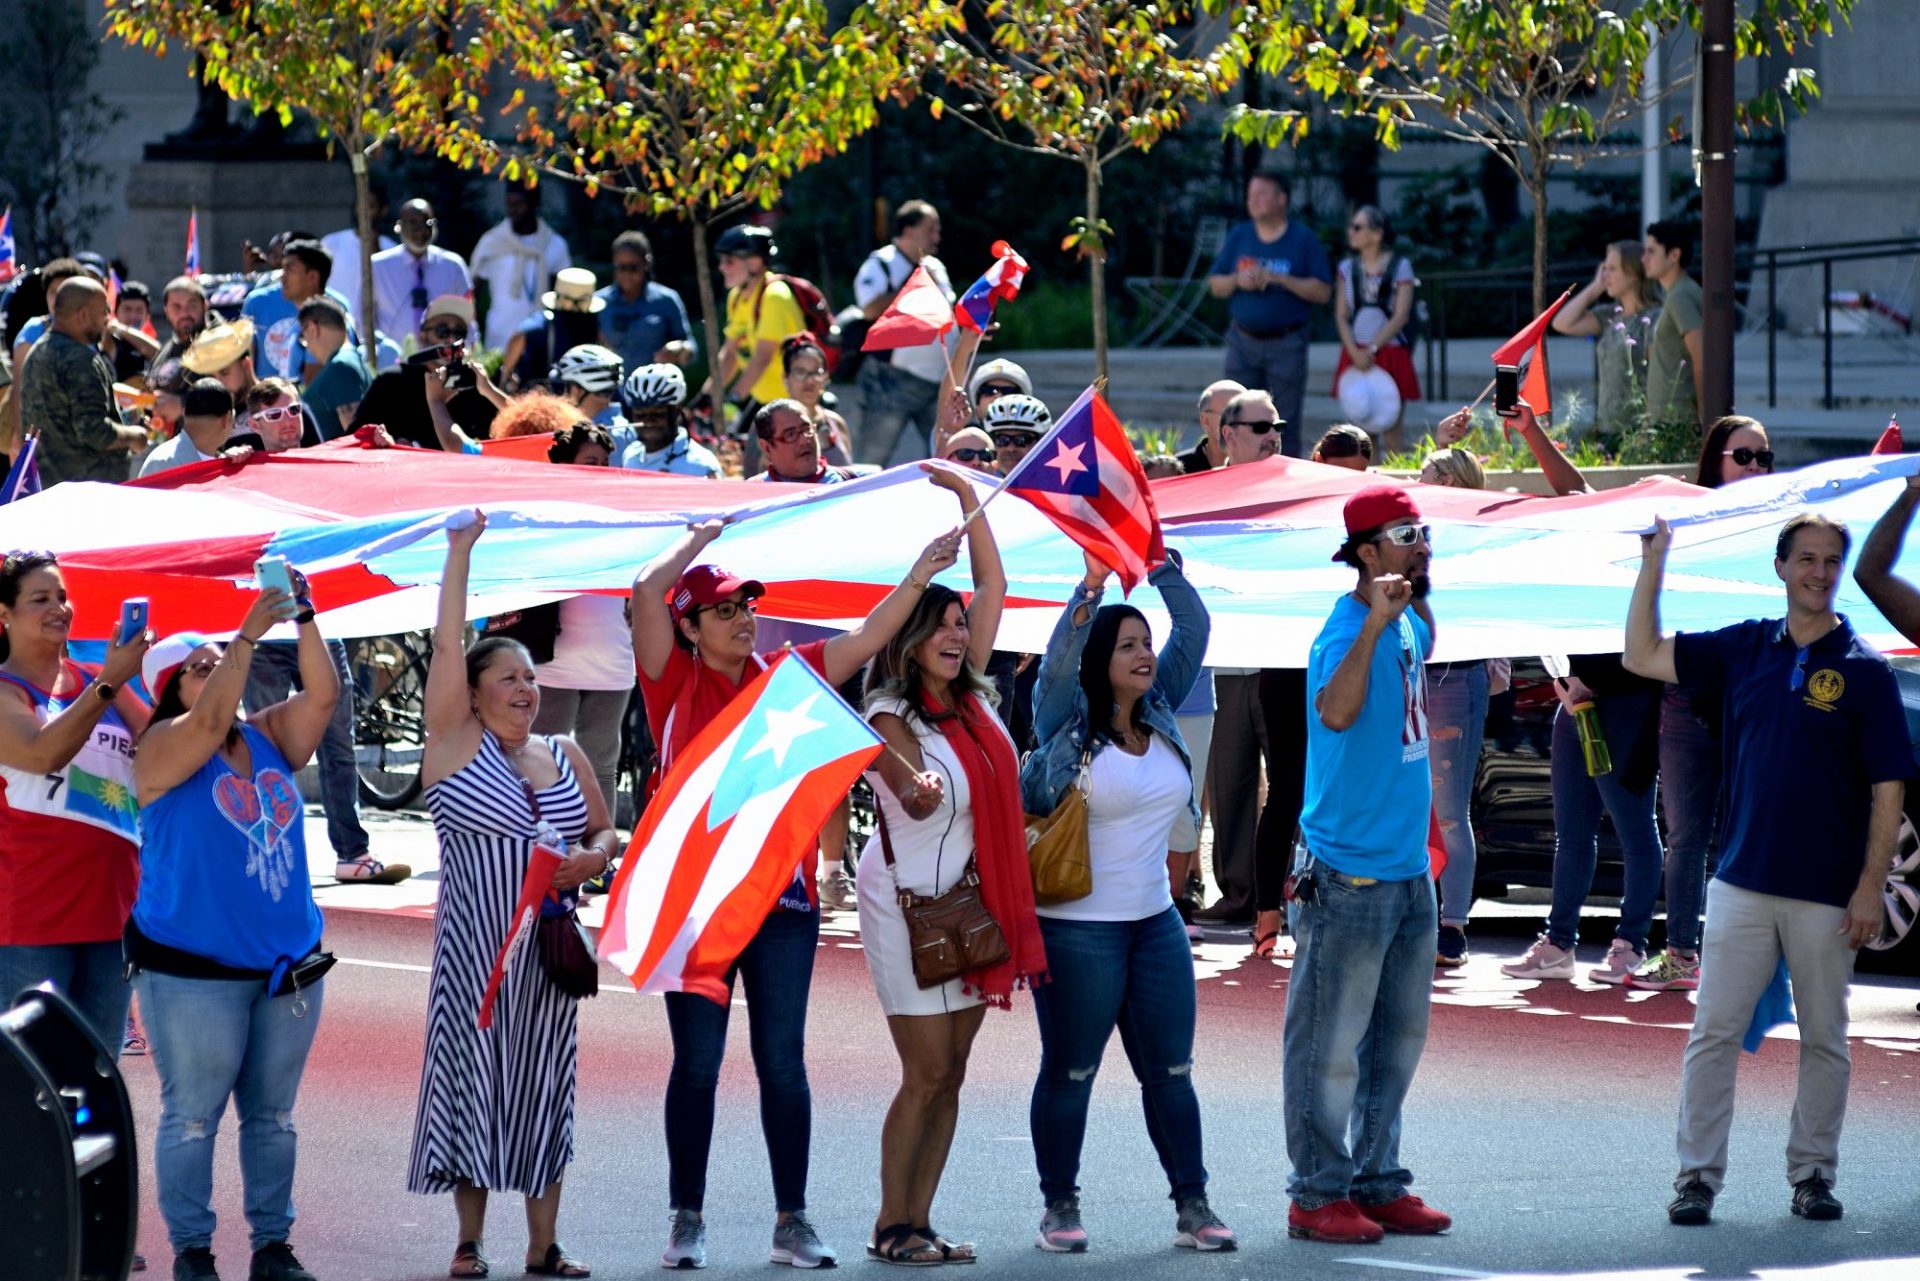 The People for Puerto Rico rally on the Benjamin Franklin Parkway.